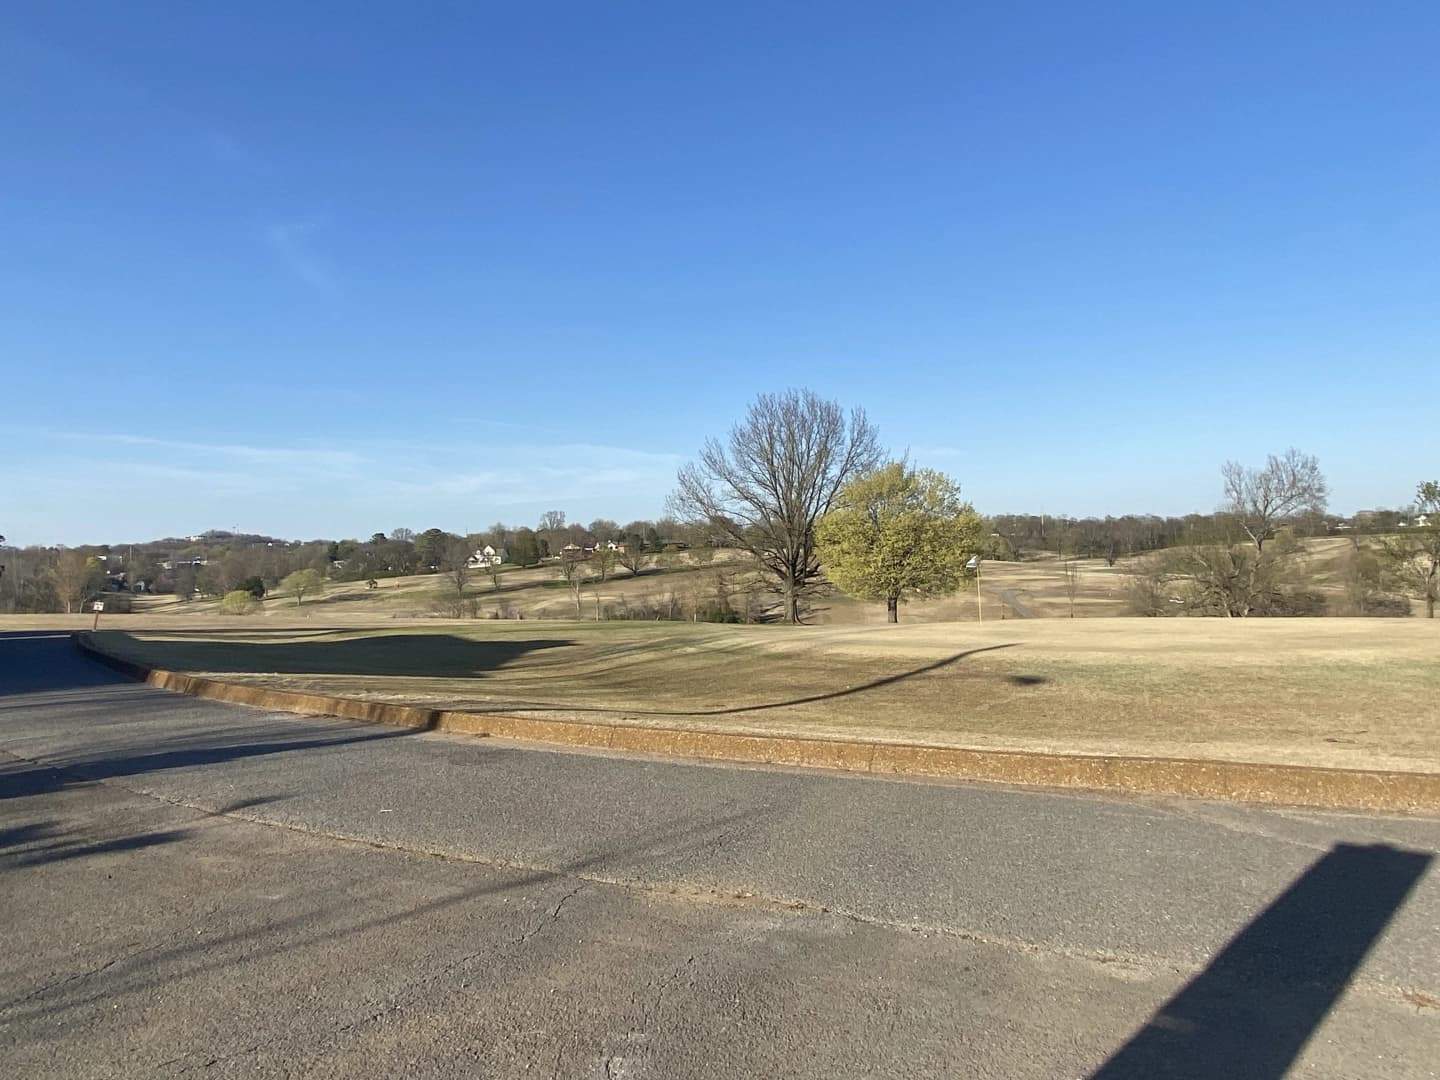 Shelby Golf Course